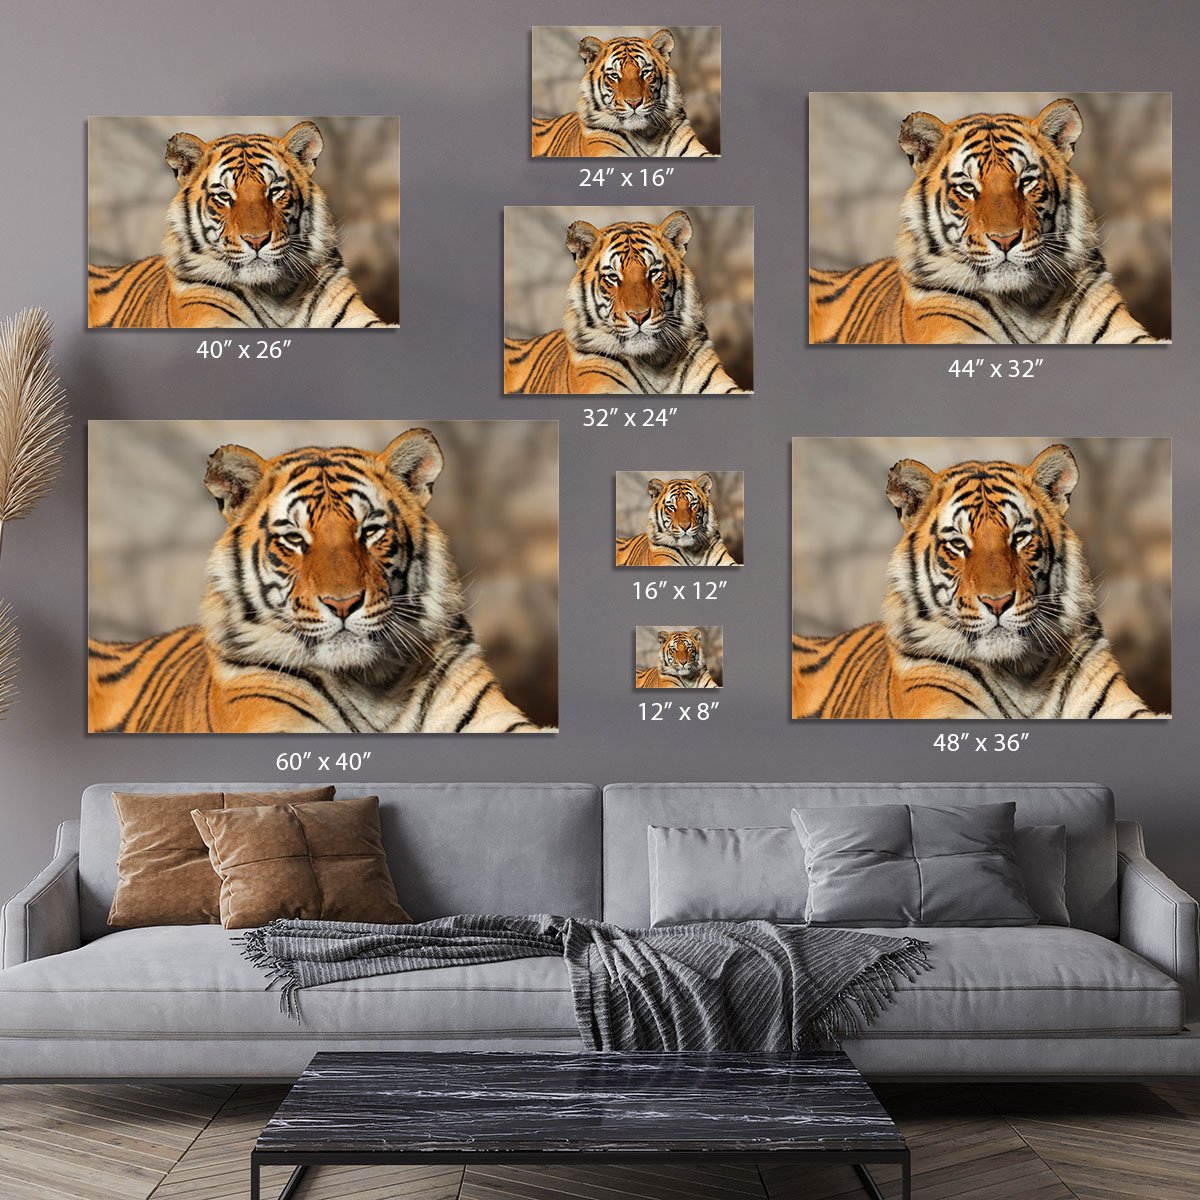 Portrait of a Bengal tiger Canvas Print or Poster